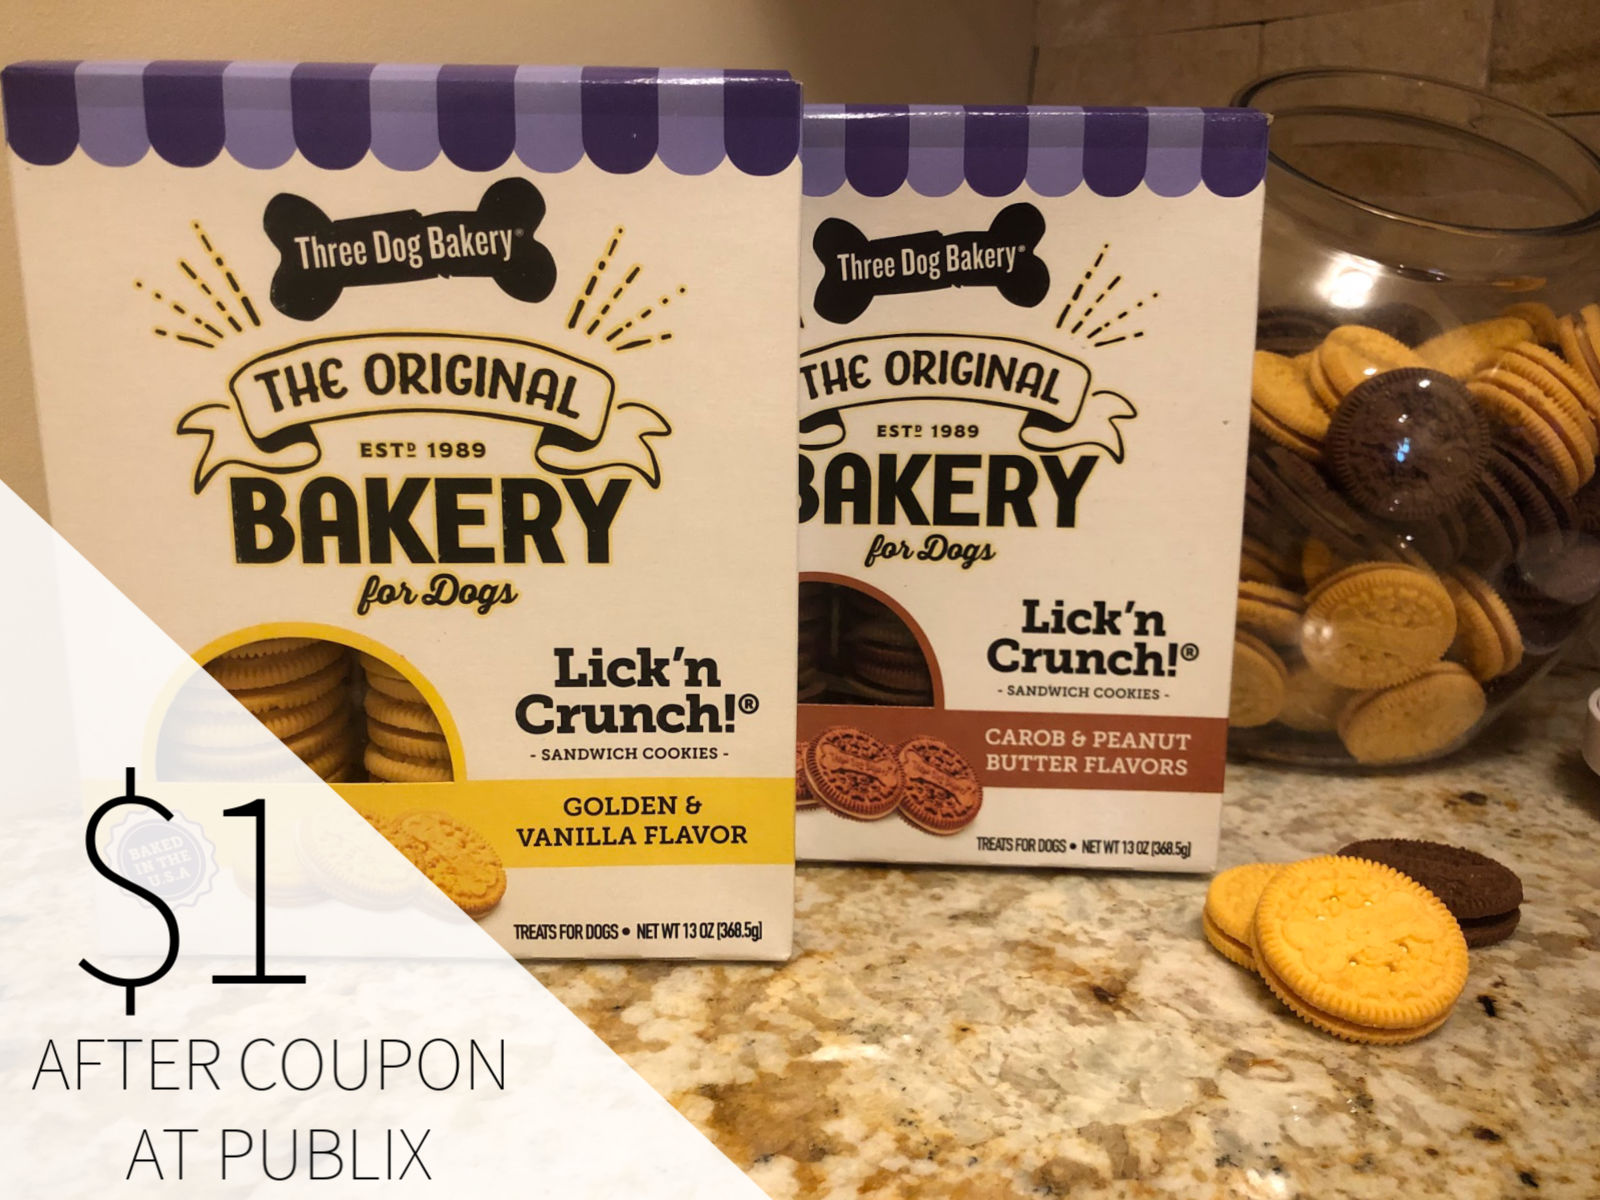 Three Dog Bakery Lick’n Crunch Treats Are Buy One, Get One FREE At Publix! on I Heart Publix 5